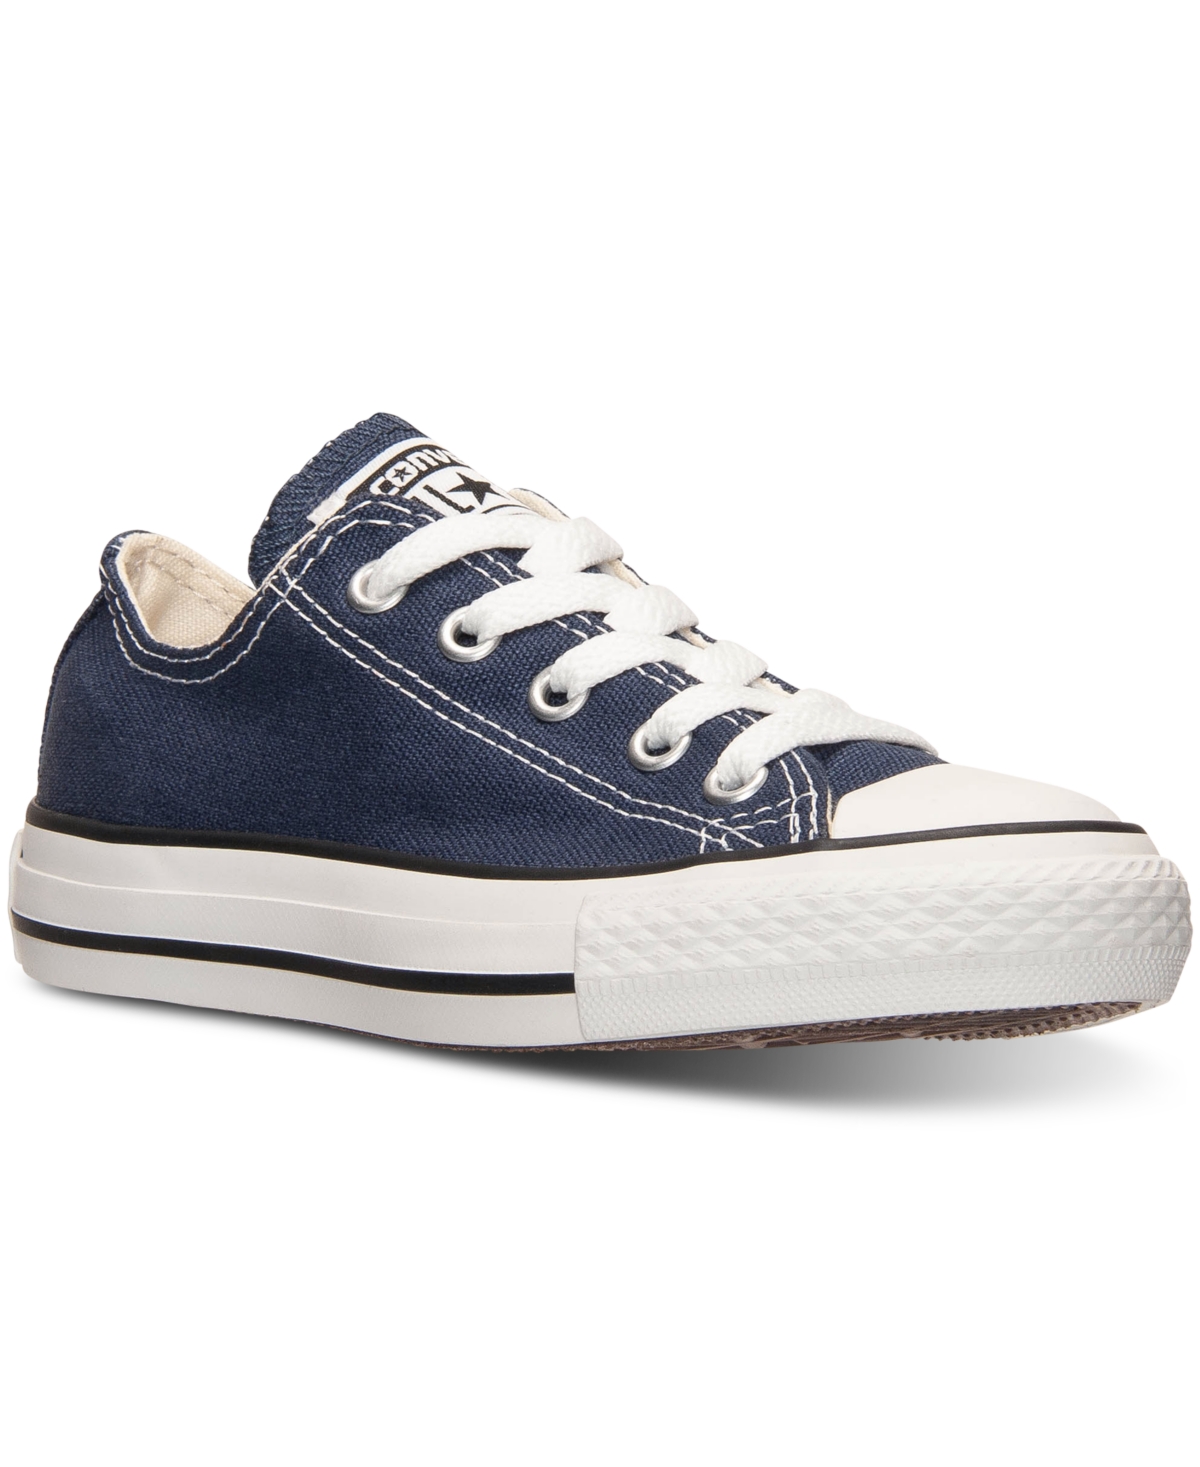 UPC 022866377508 product image for Converse Little Kids' Chuck Taylor Original Sneakers from Finish Line | upcitemdb.com